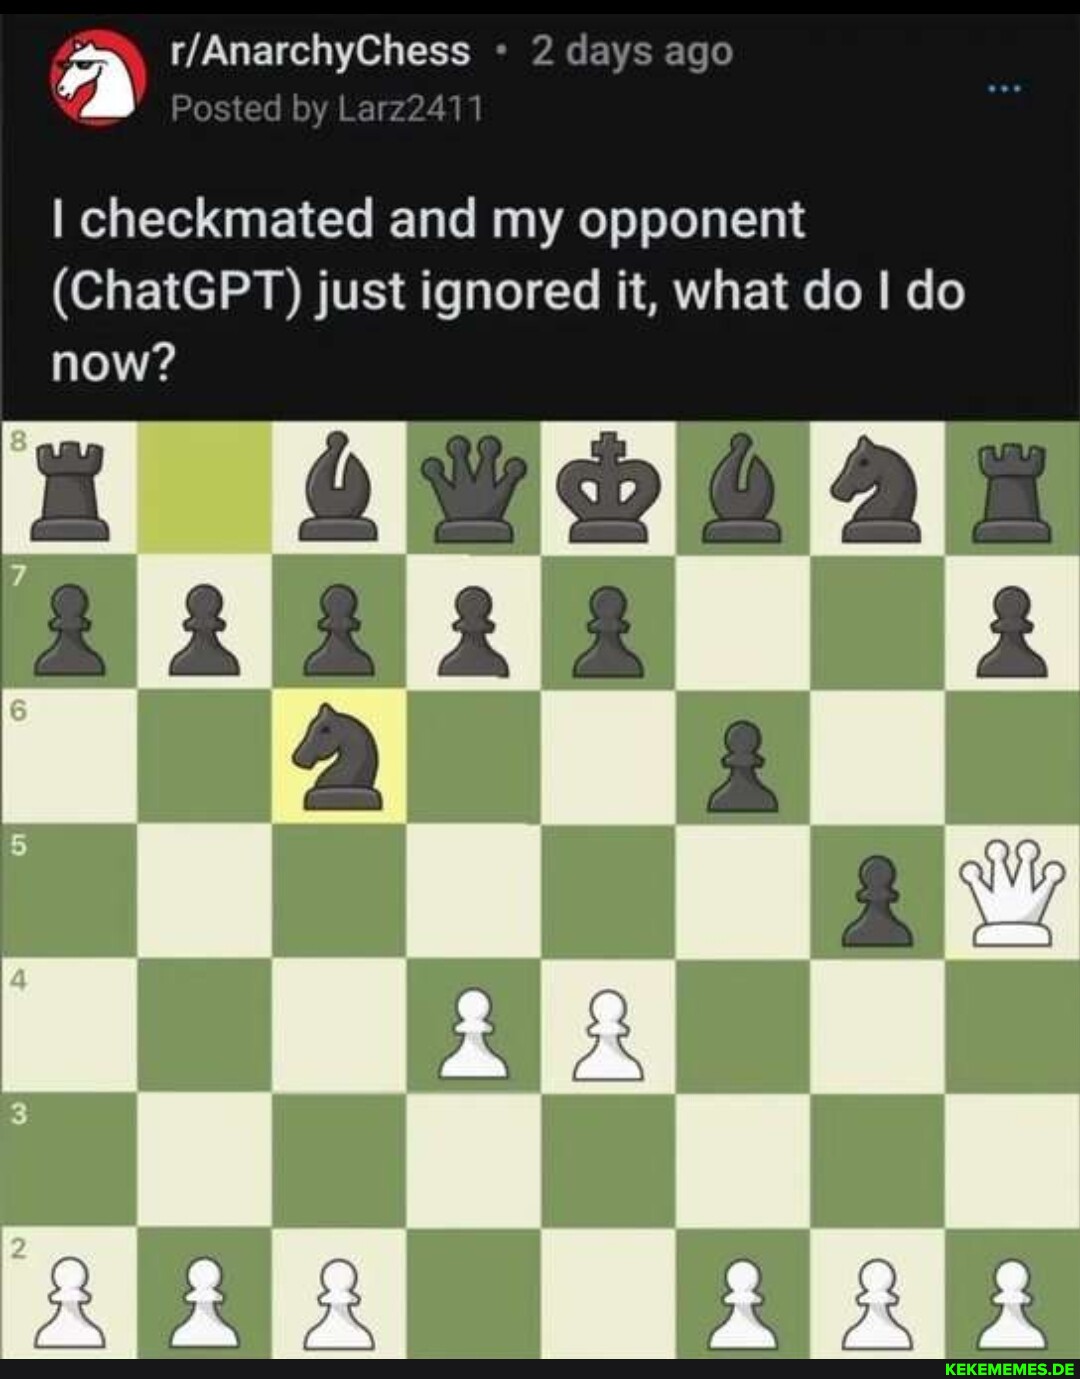 2 days ago Posted by Larz2471 I checkmated and my opponent (ChatGPT) just ignore